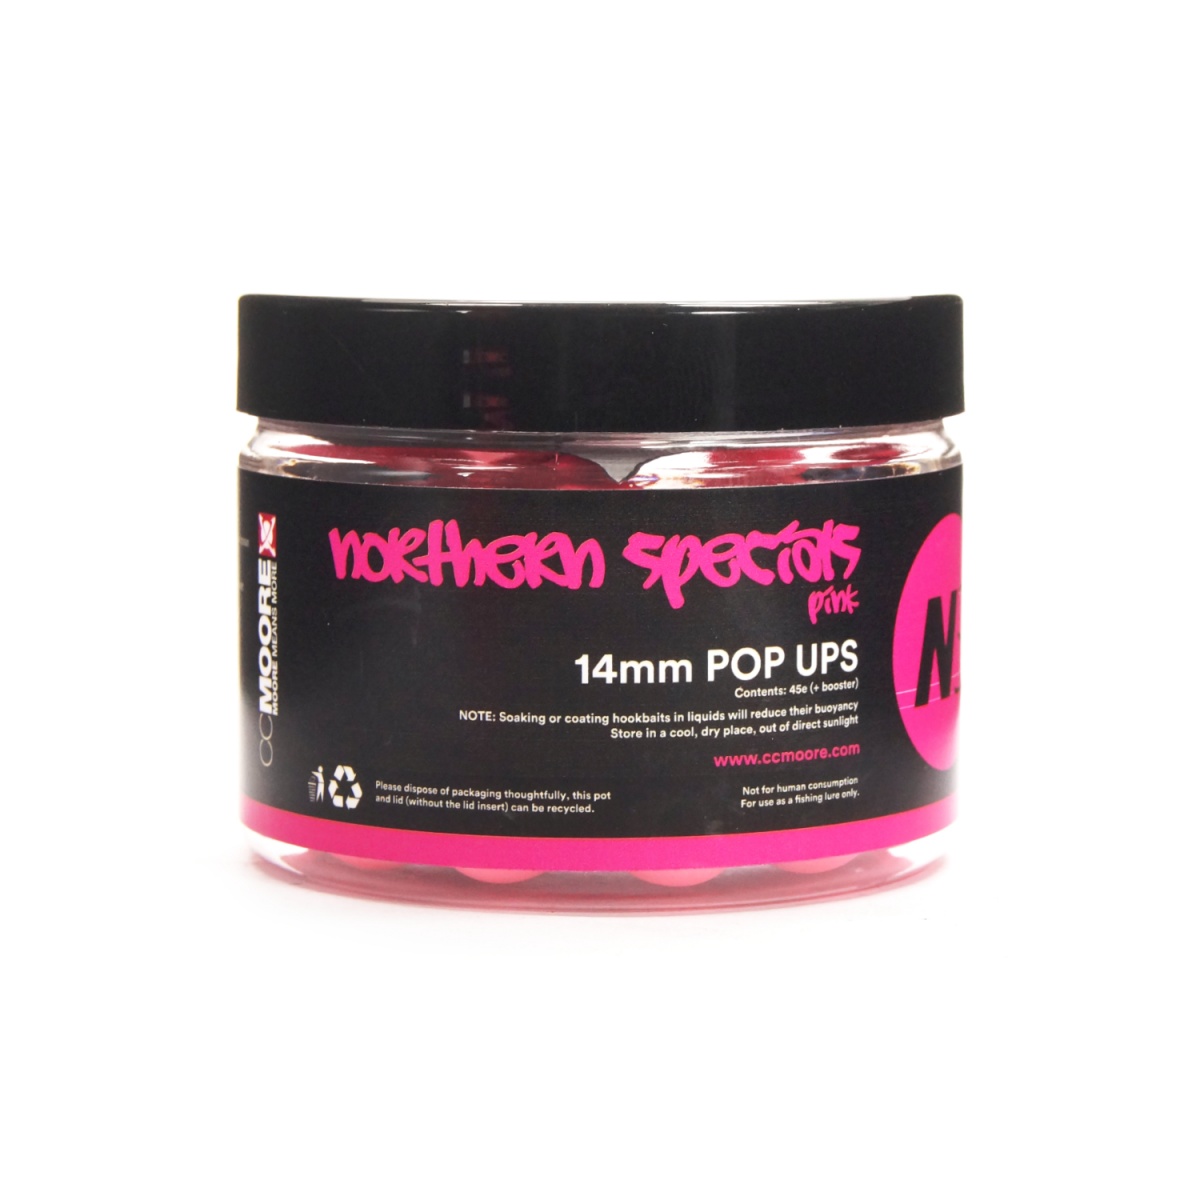 NEW CcMoore Northern Special NS1 Pink Pop Ups 14 mm rozmiar